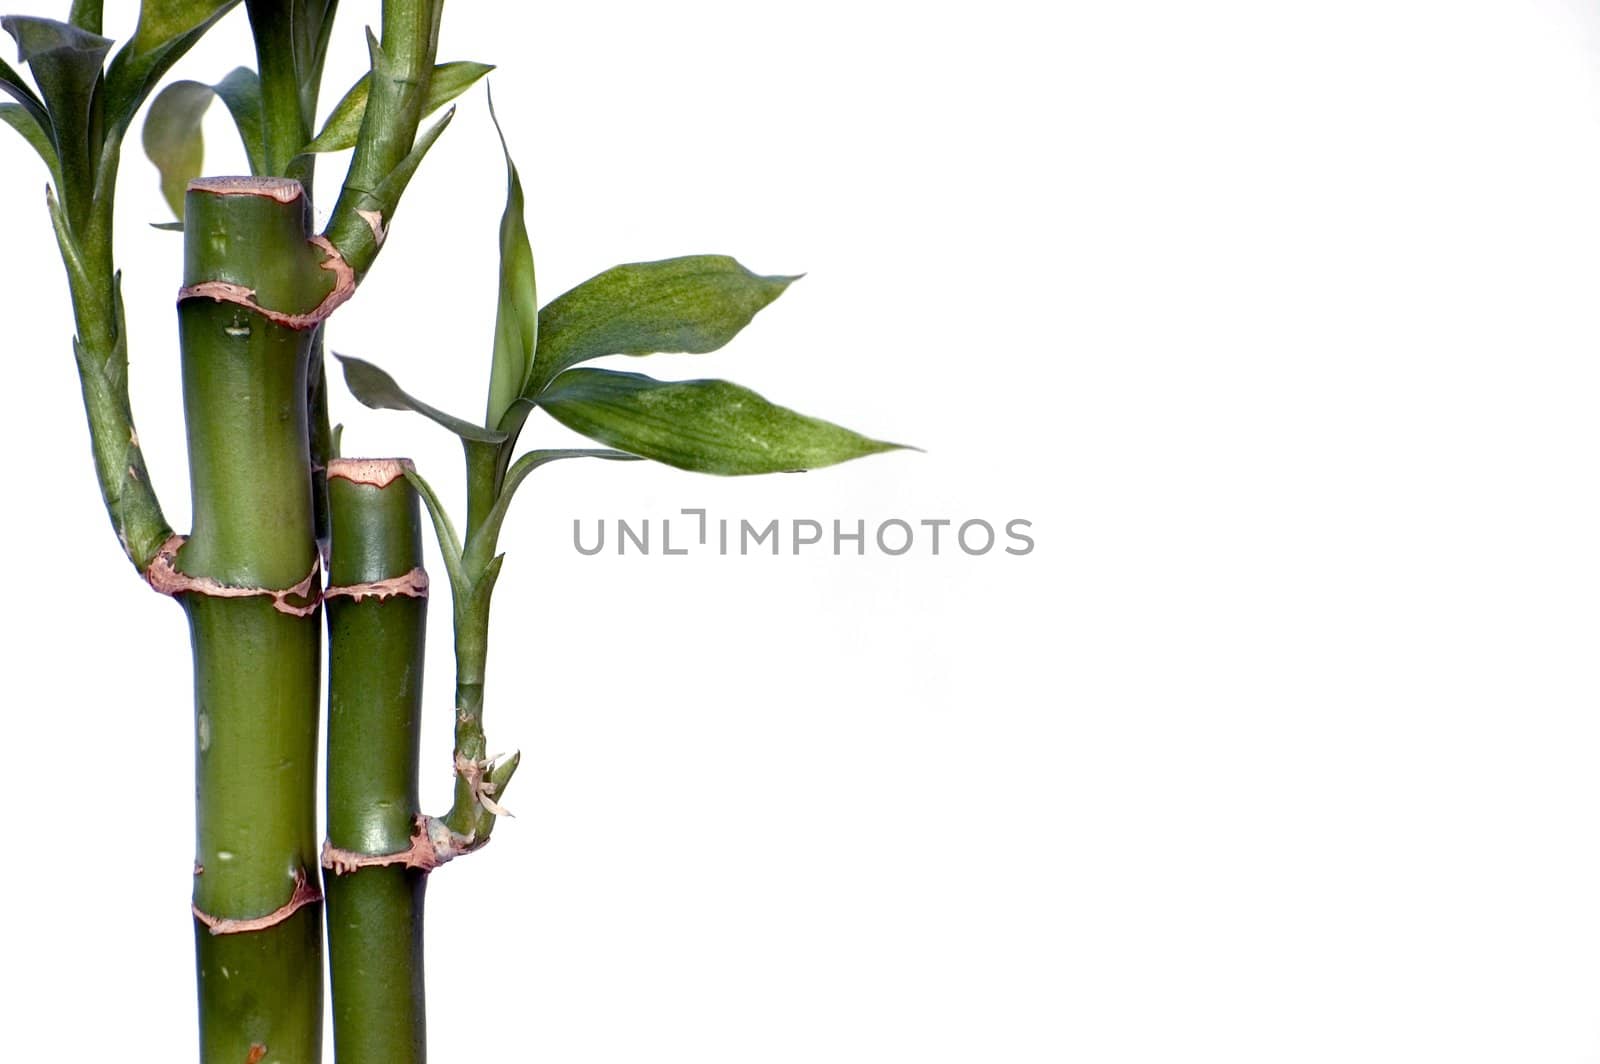 A pair of bamboo shoots against a white background.